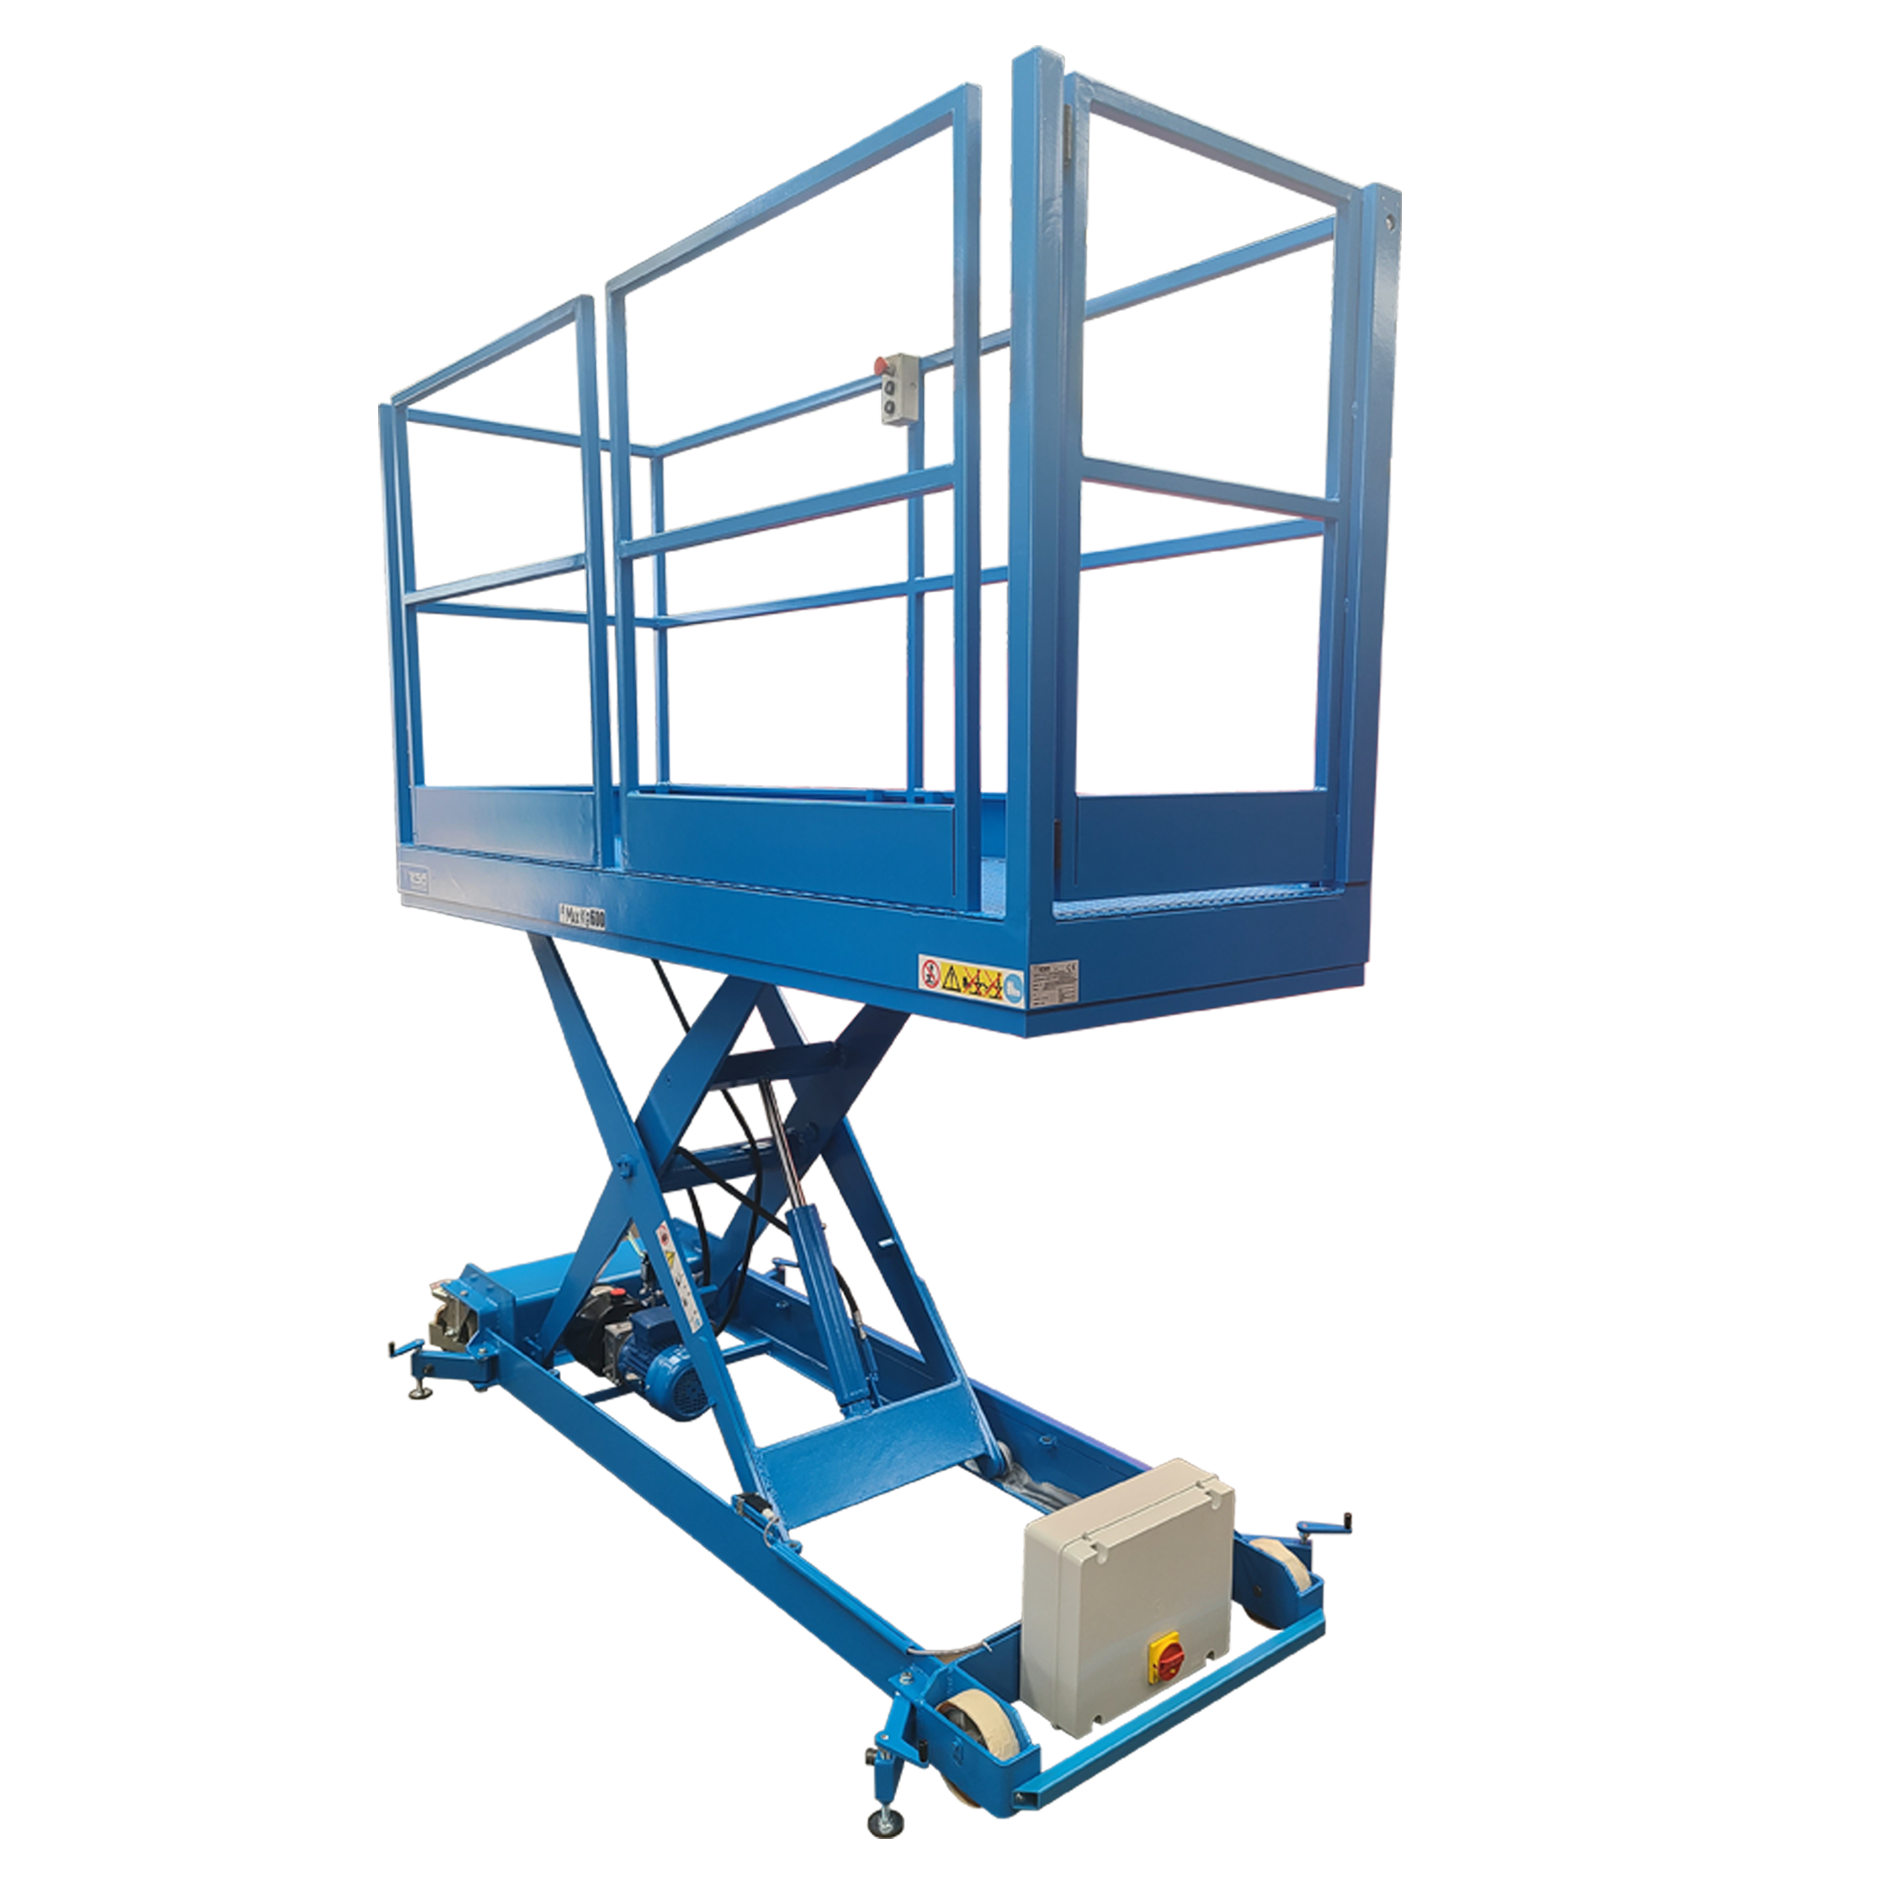 Mobile elevating worker platform lift  with access gate and guard rails - Mobile worker platforms - worker platform lifts - carousel platform lifts - elevating platforms - worker scissor lifts- personnel lifts - lift tables for workers